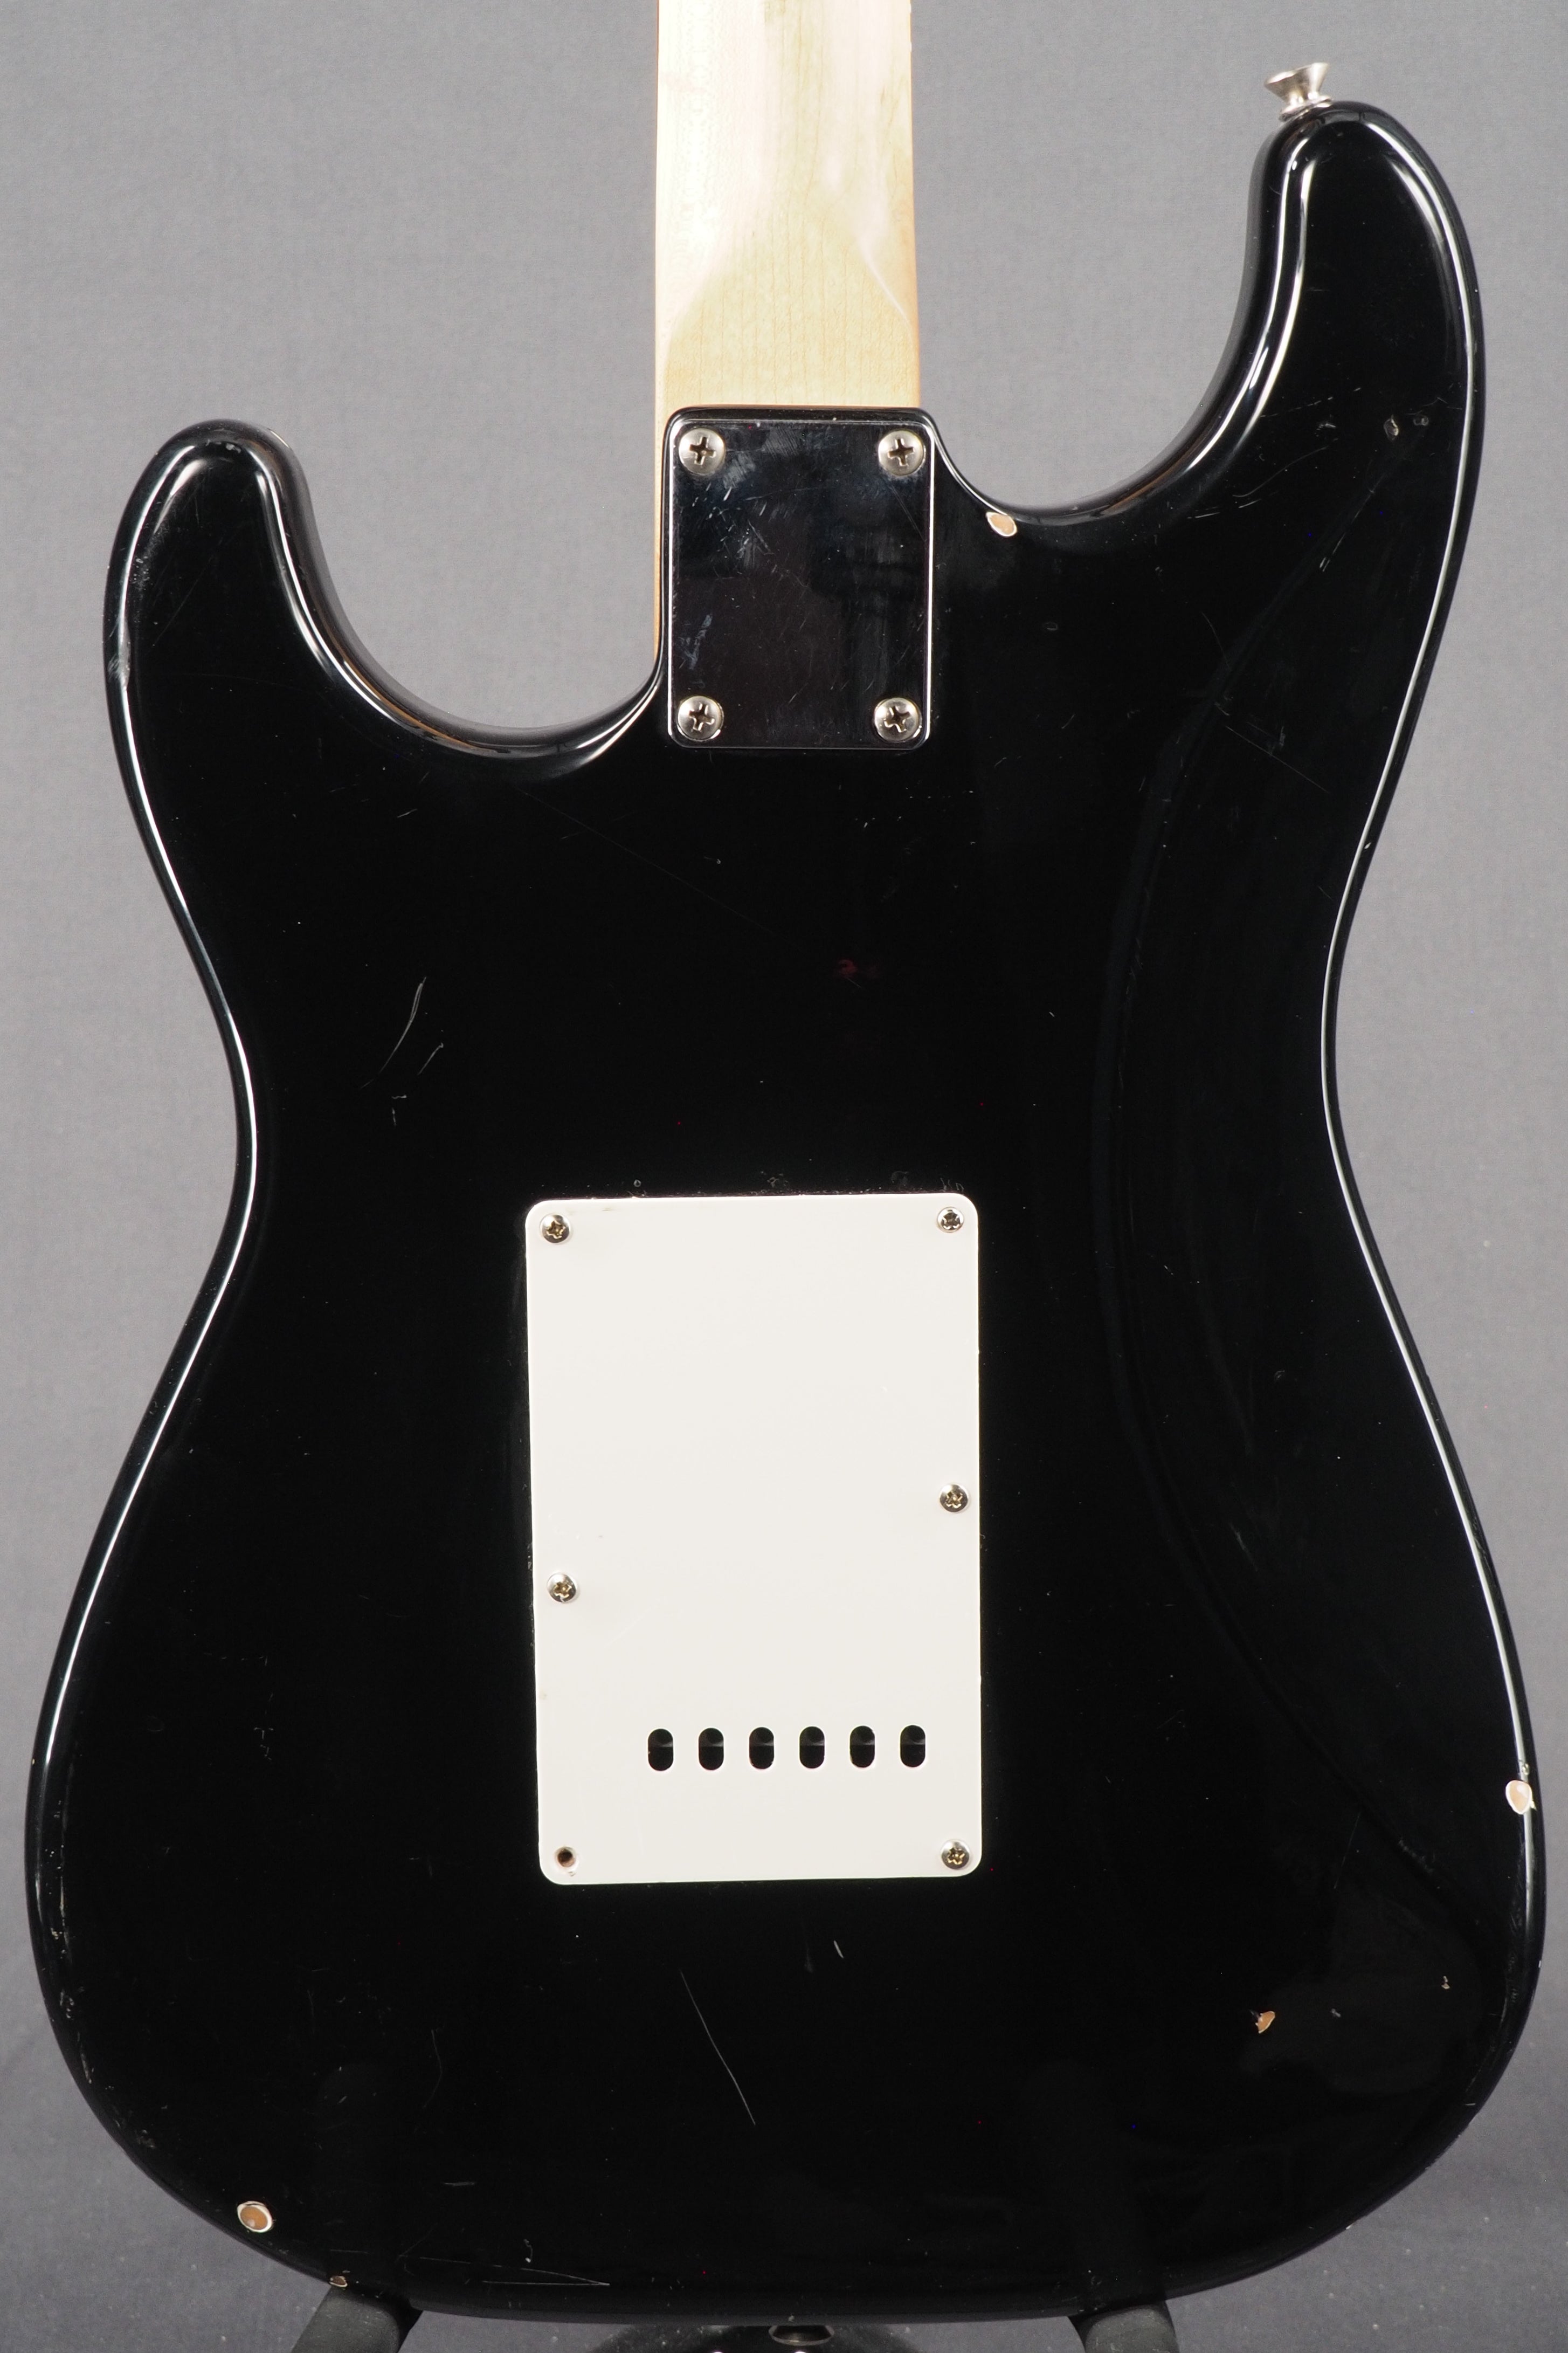 Squier Affinity Stratocaster - Black - In-Store Pickup Only